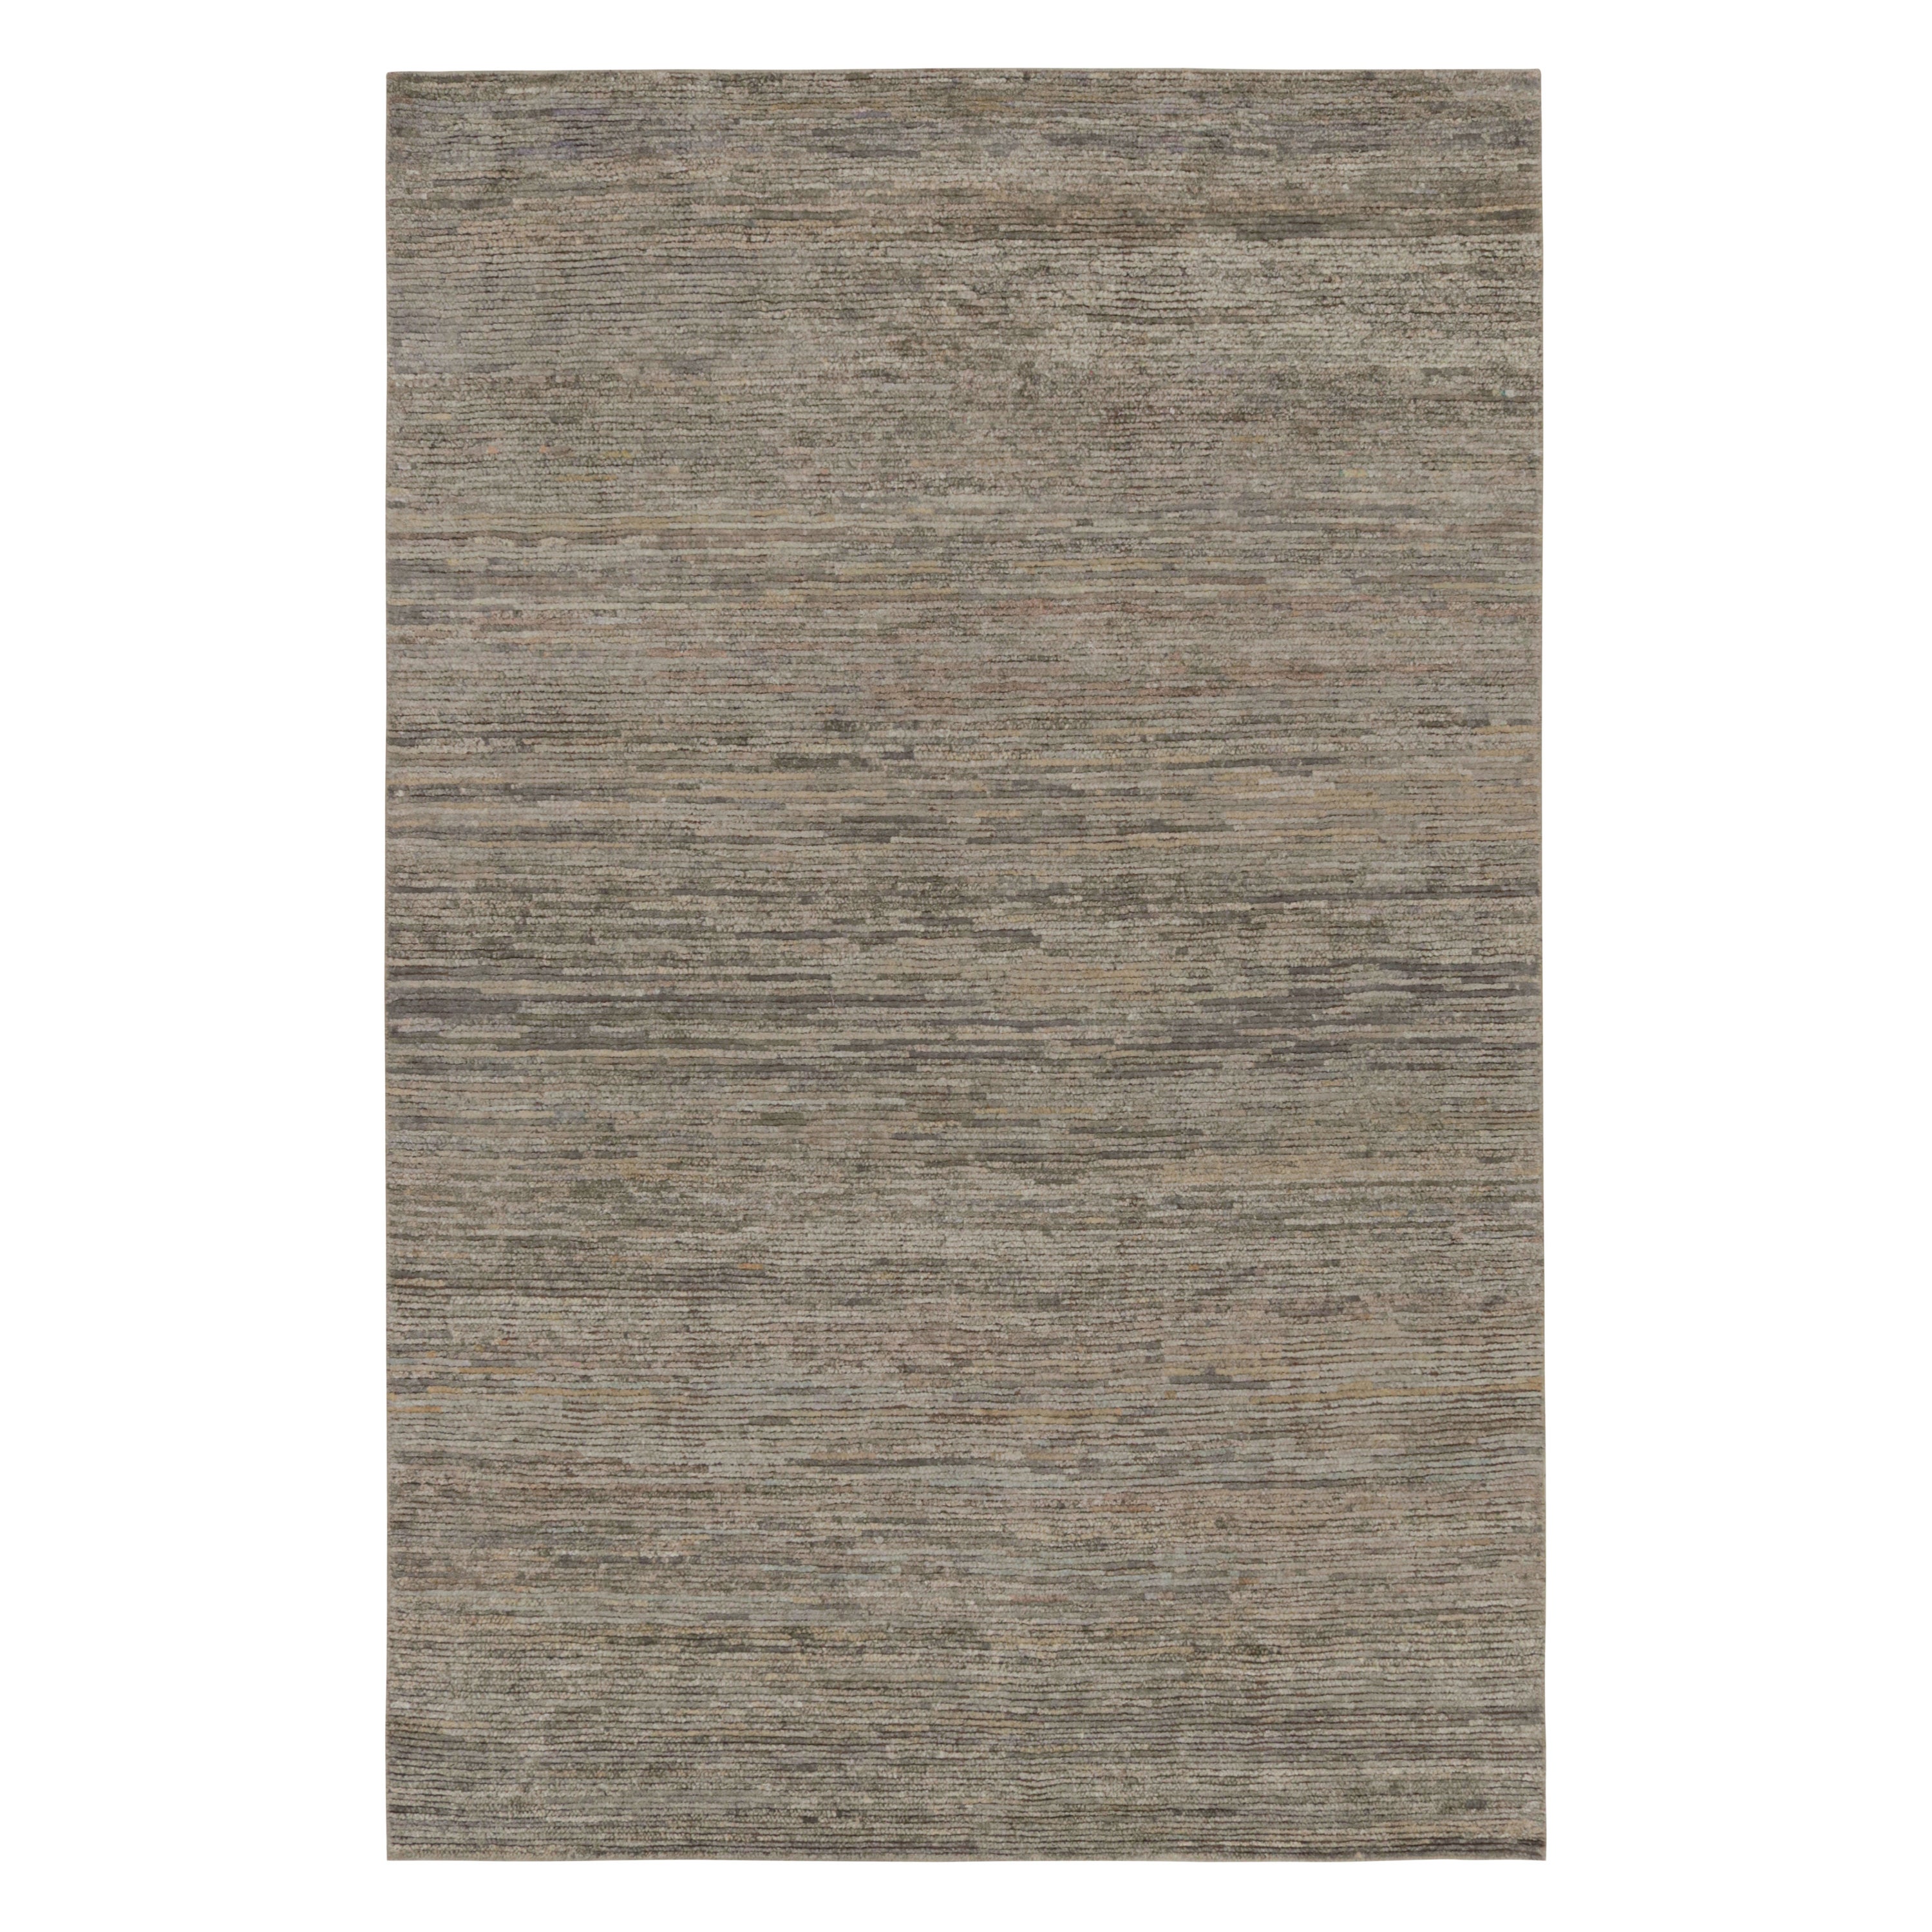 Hand-knotted in wool, silk and cotton, this 6x9 contemporary simple rug in gray and beige as an addition to the Rug & Kilim’s Texture of Color line of our Textural rug collection, is an inventive take on solid rugs with movement in its subtle